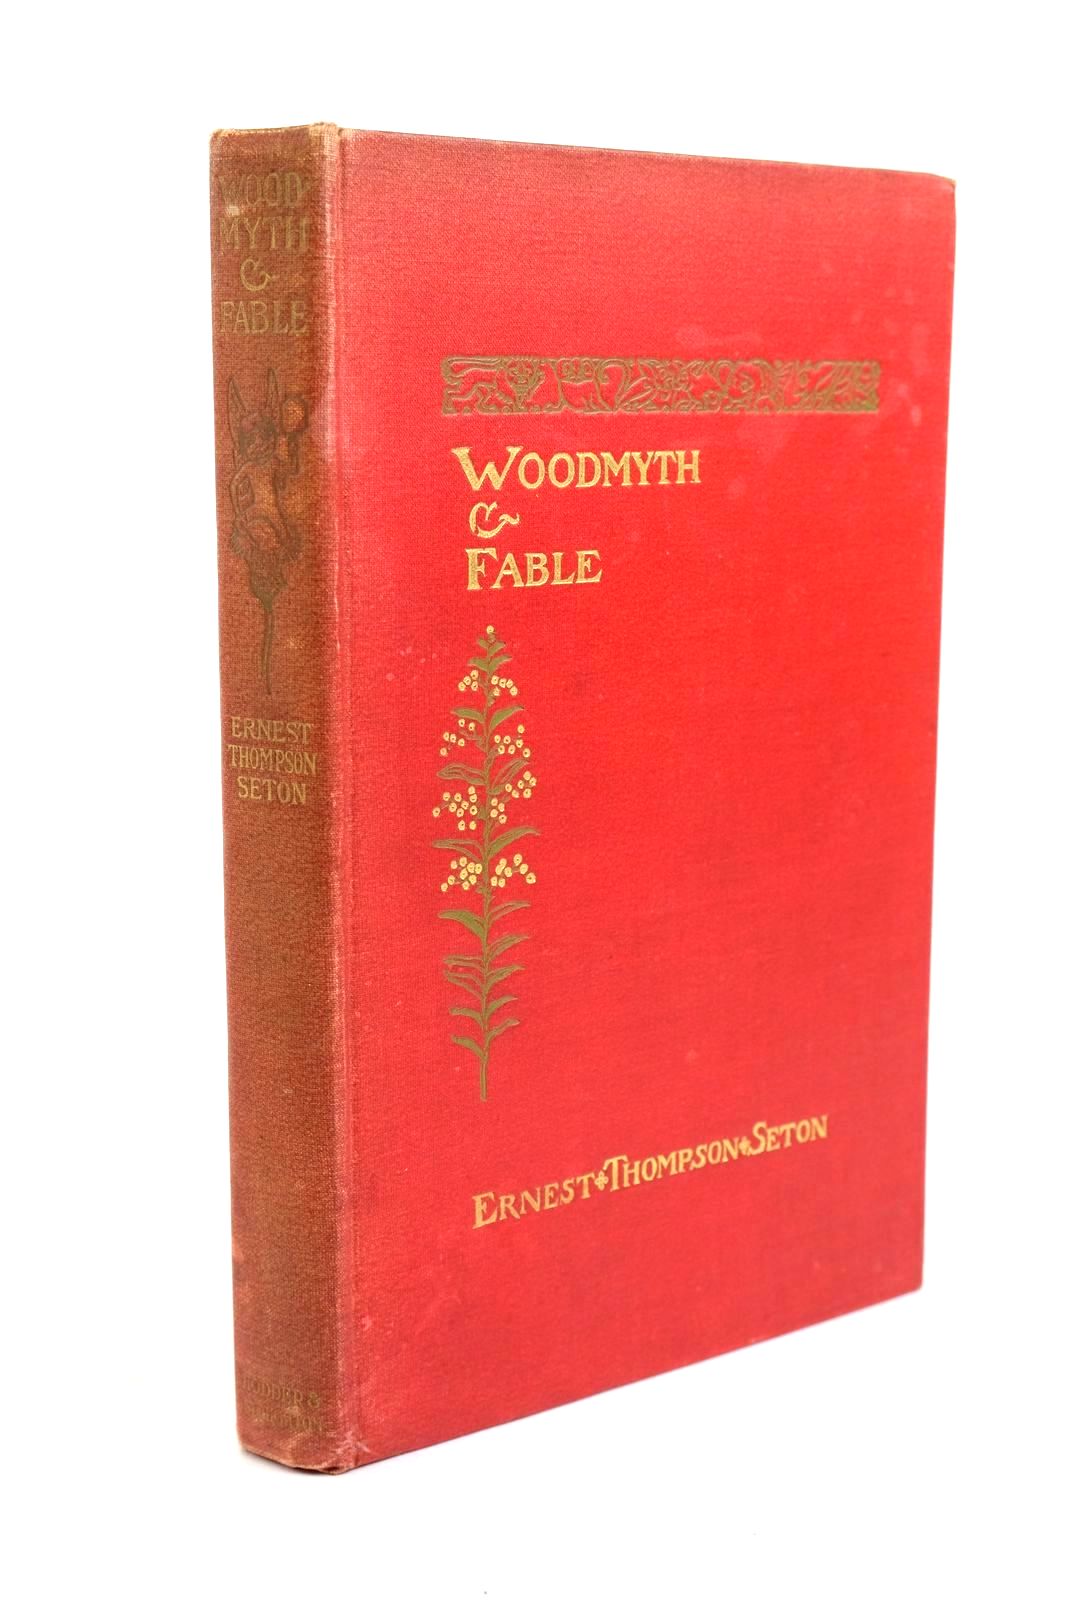 Photo of WOODMYTH & FABLE written by Seton, Ernest Thompson illustrated by Seton, Ernest Thompson published by Hodder & Stoughton (STOCK CODE: 1321514)  for sale by Stella & Rose's Books